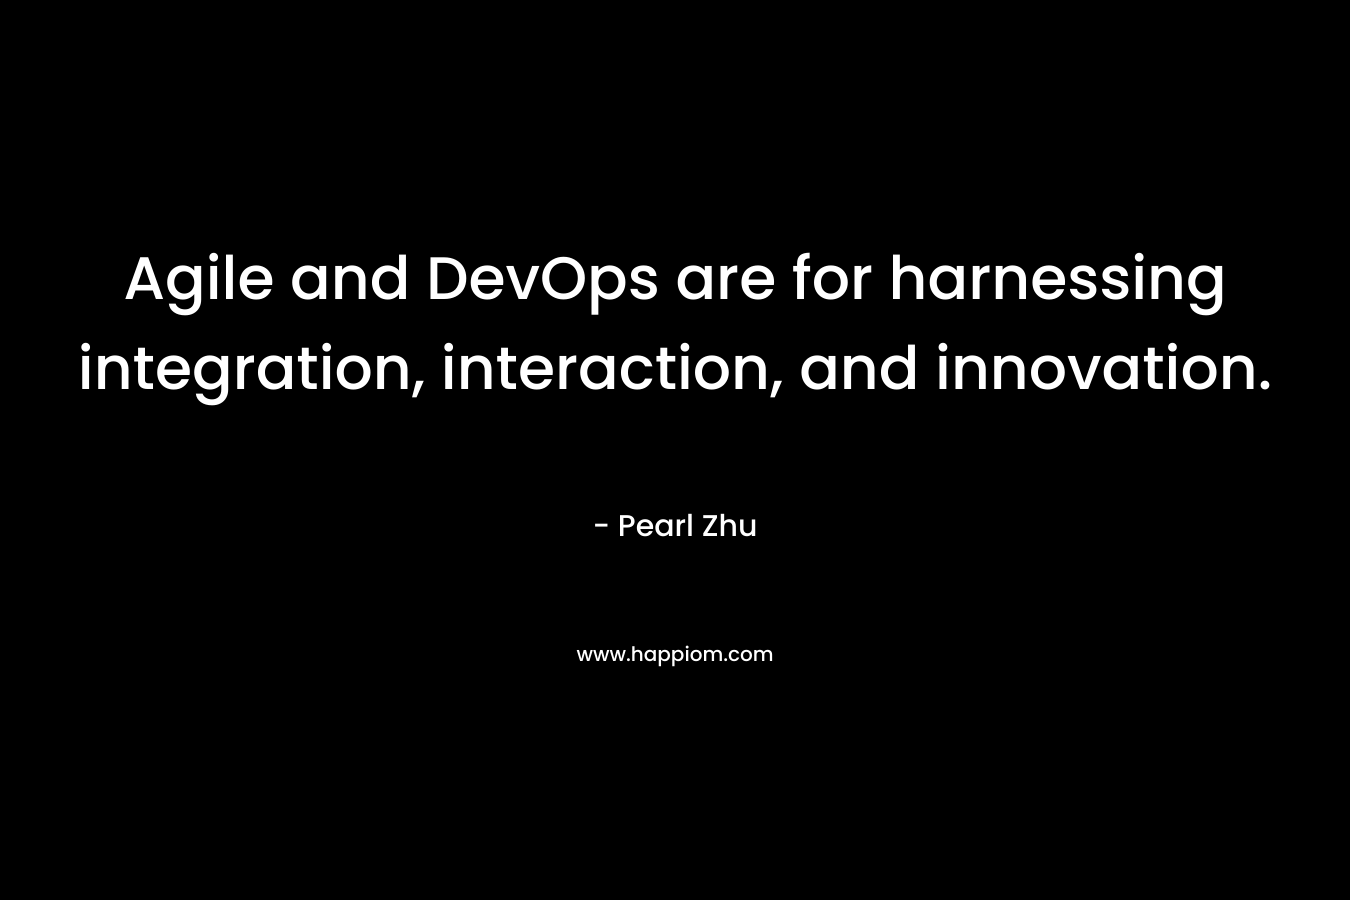 Agile and DevOps are for harnessing integration, interaction, and innovation. – Pearl Zhu